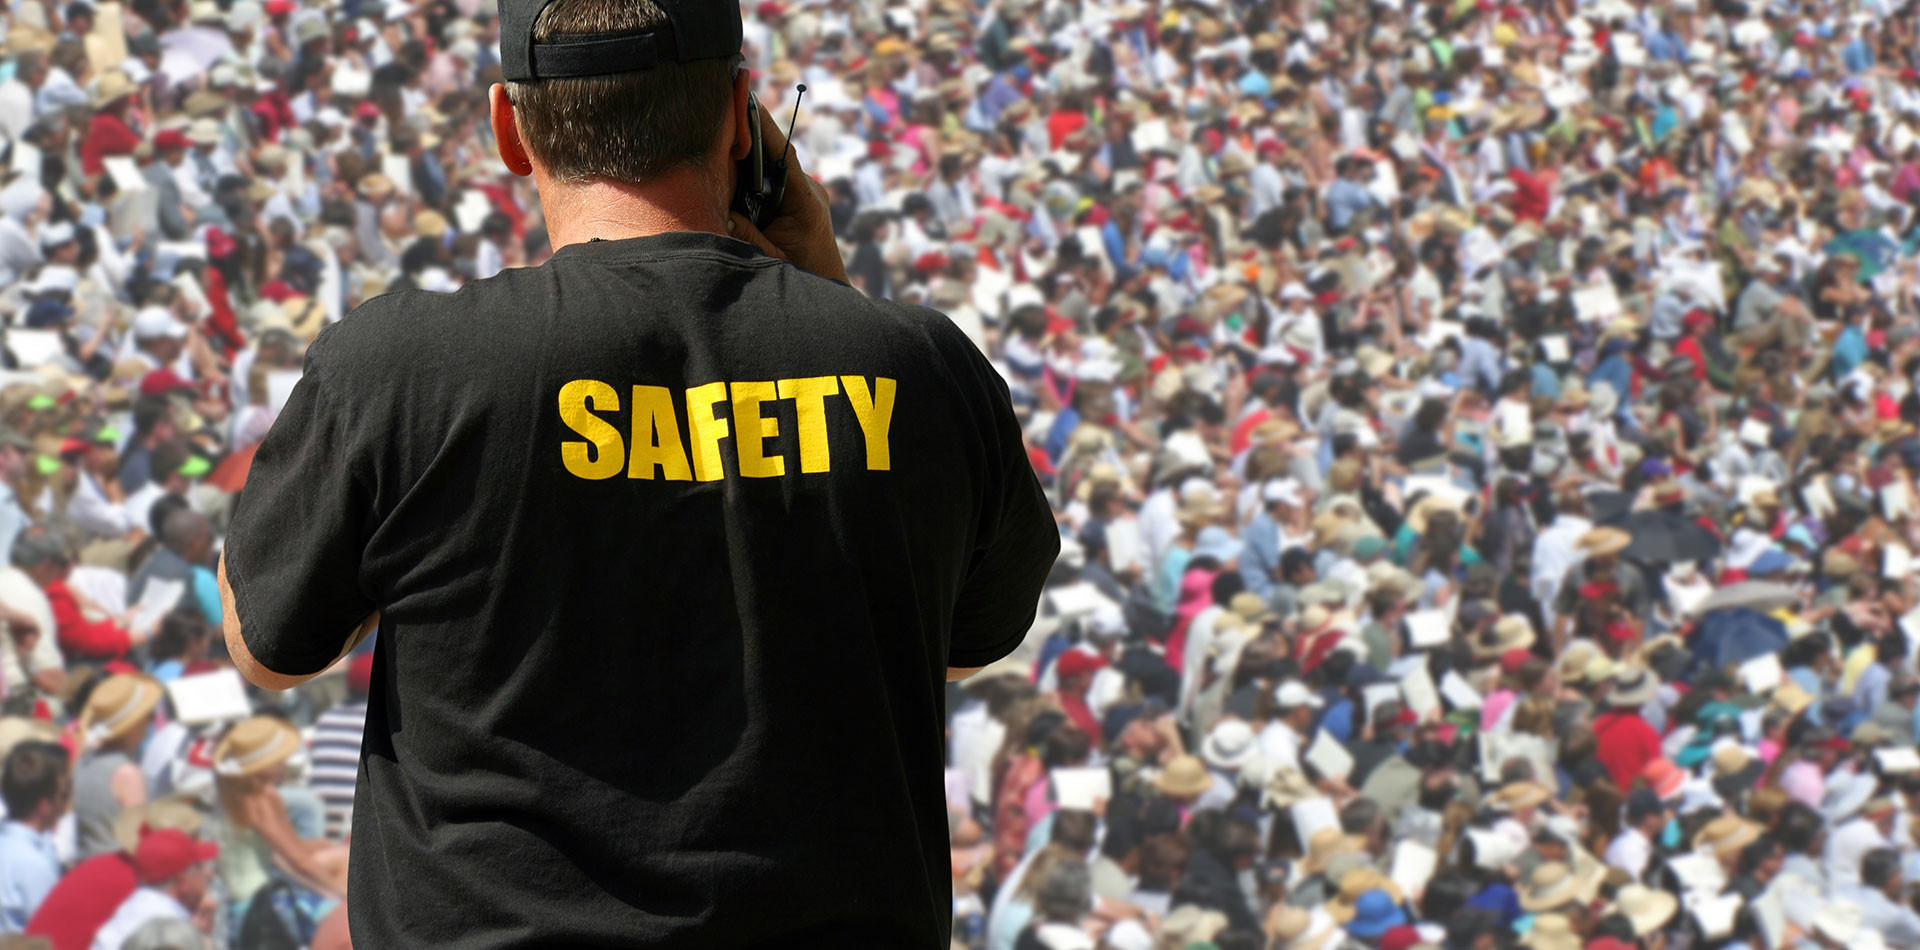 Crowd Safety. England event Safety.